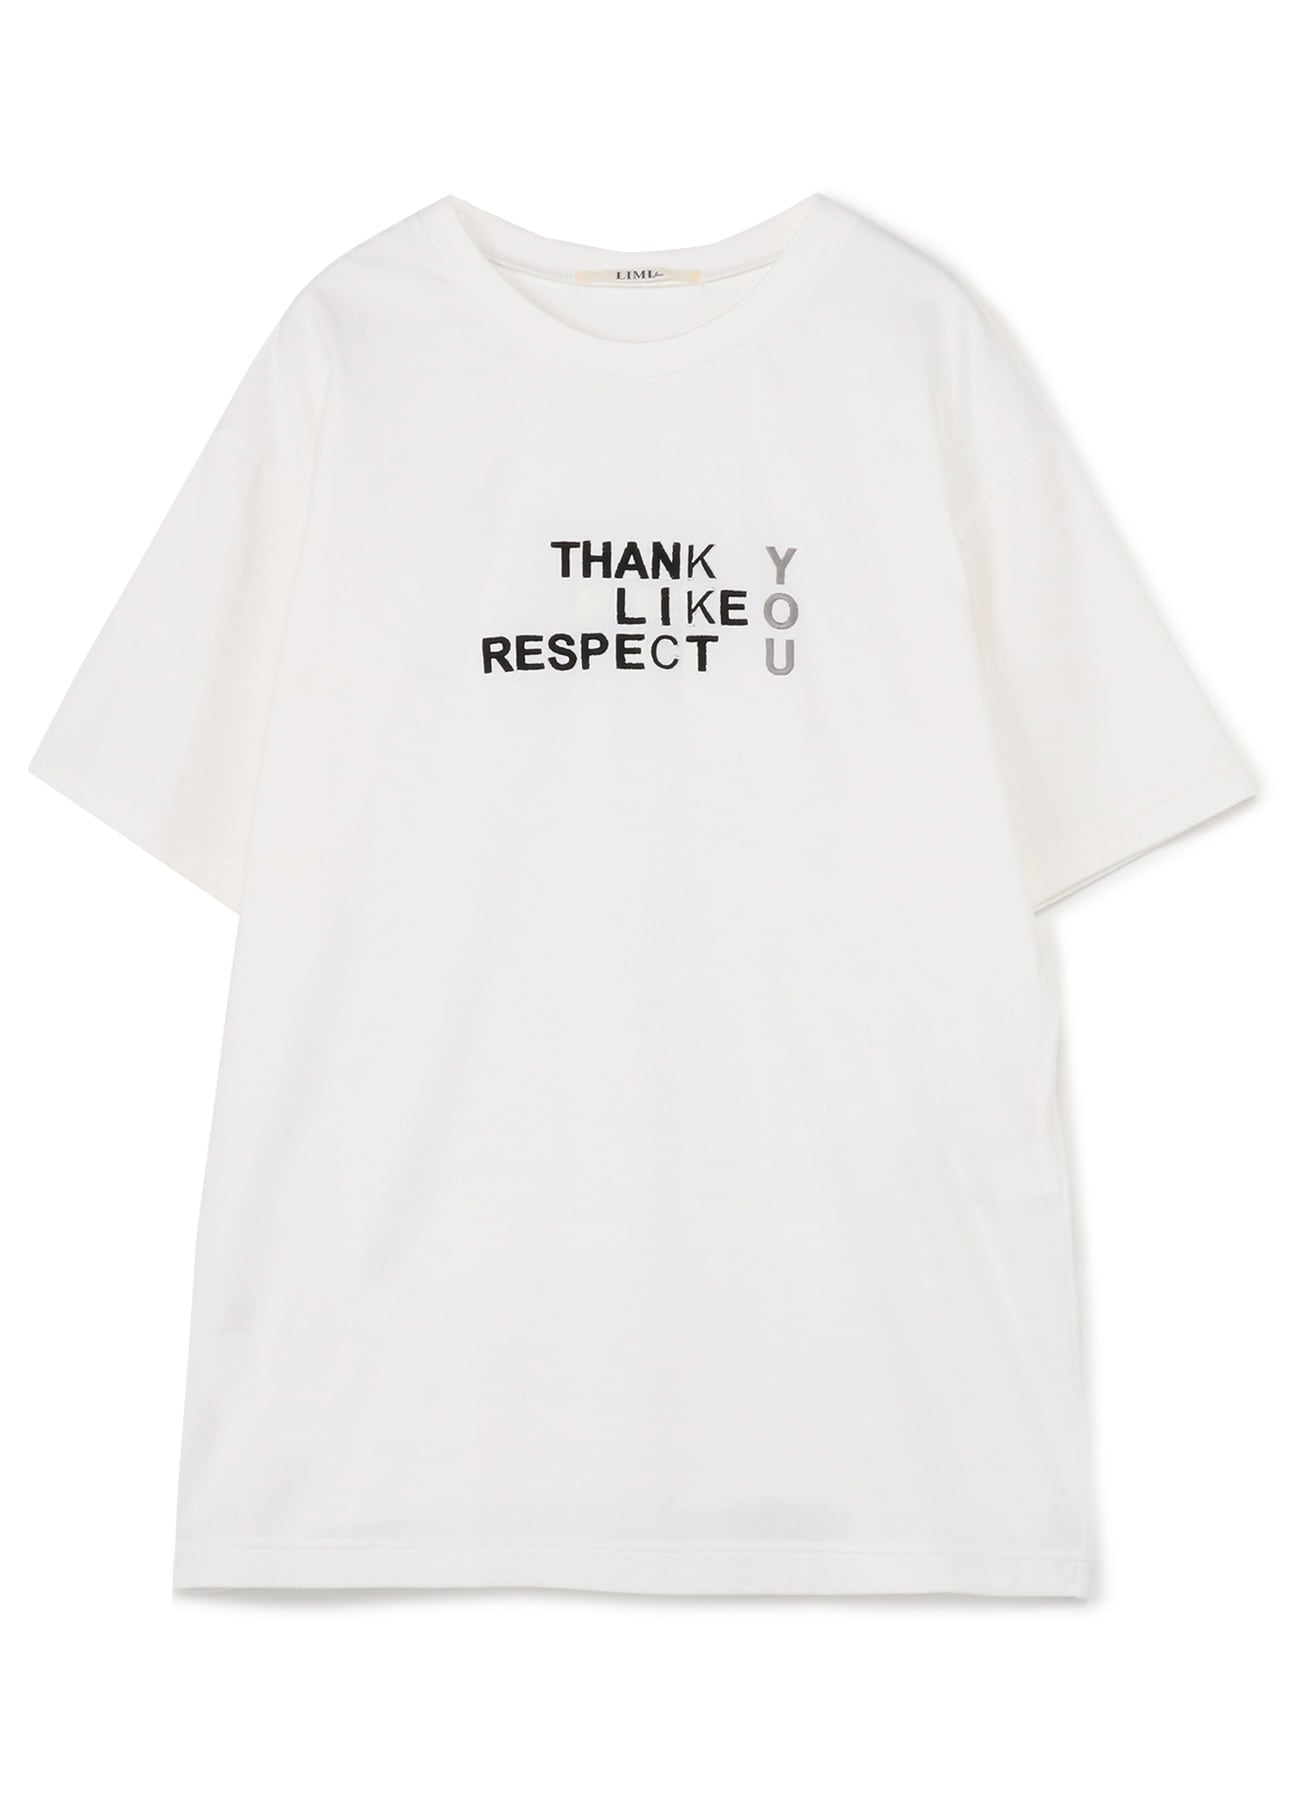 FU*K YOU Embroidery Oversized T-Shirt(S White): Vintage 1.1｜THE